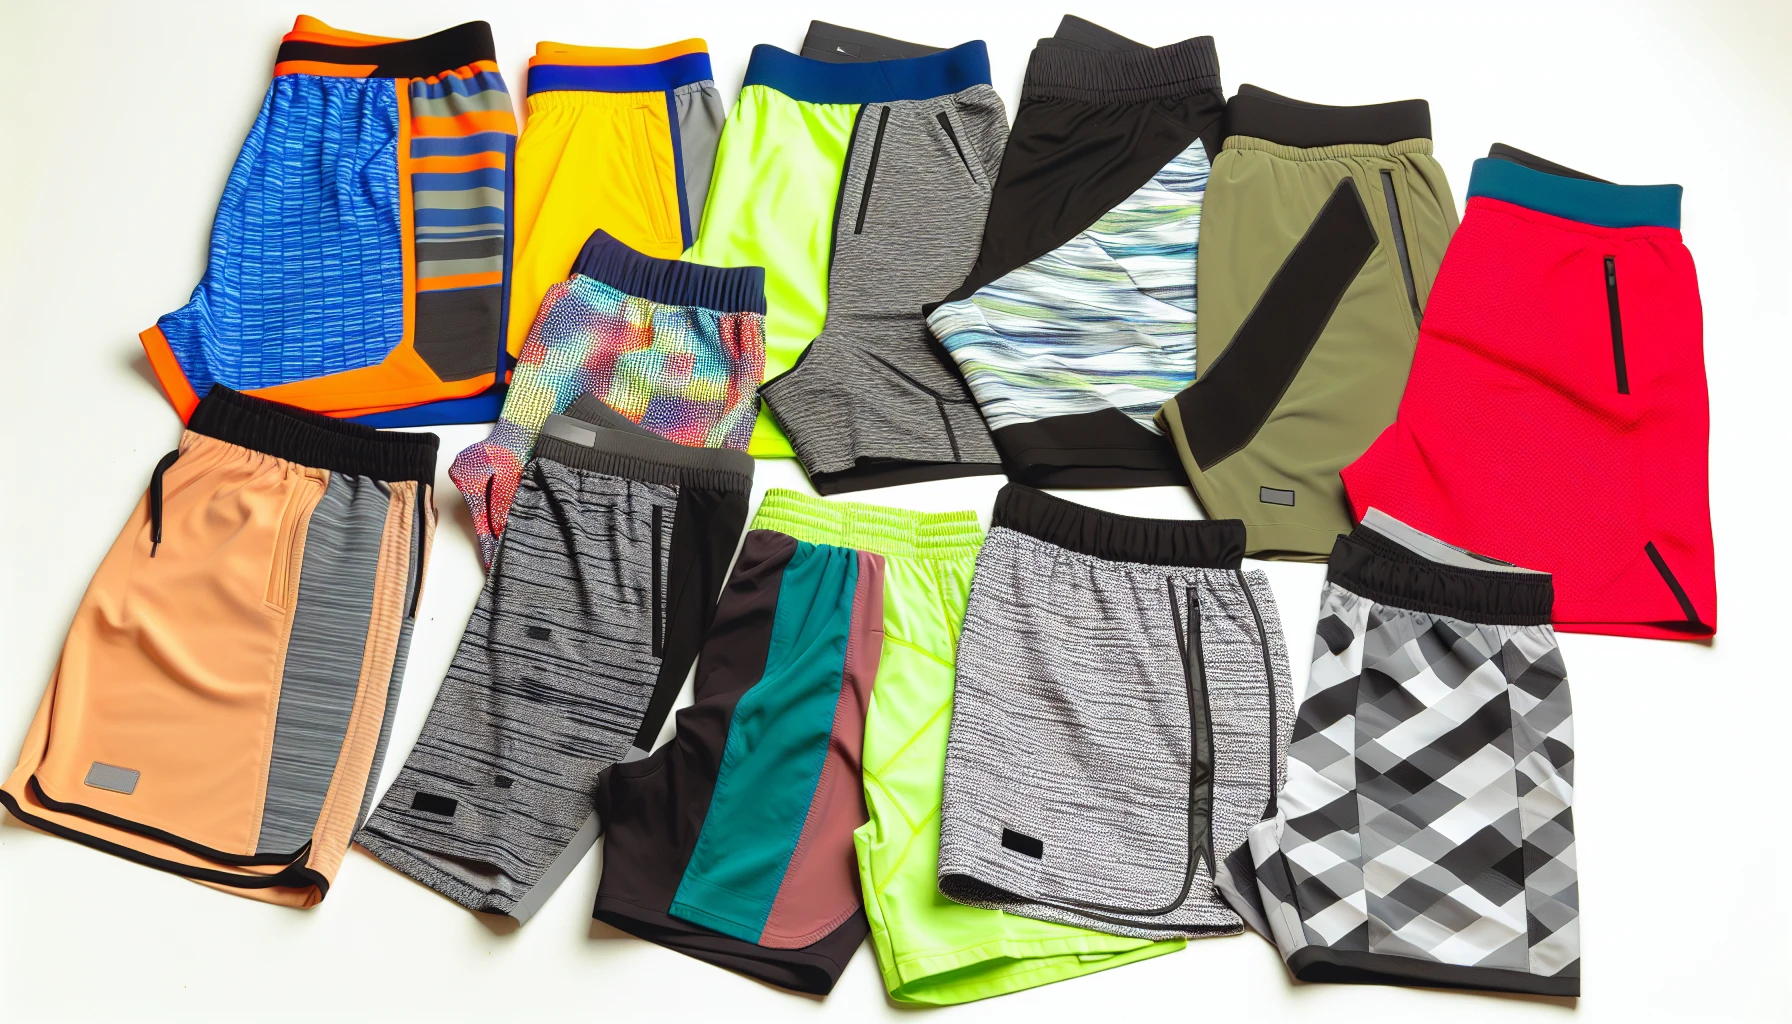 Stylish and functional fitness shorts in various colors and patterns